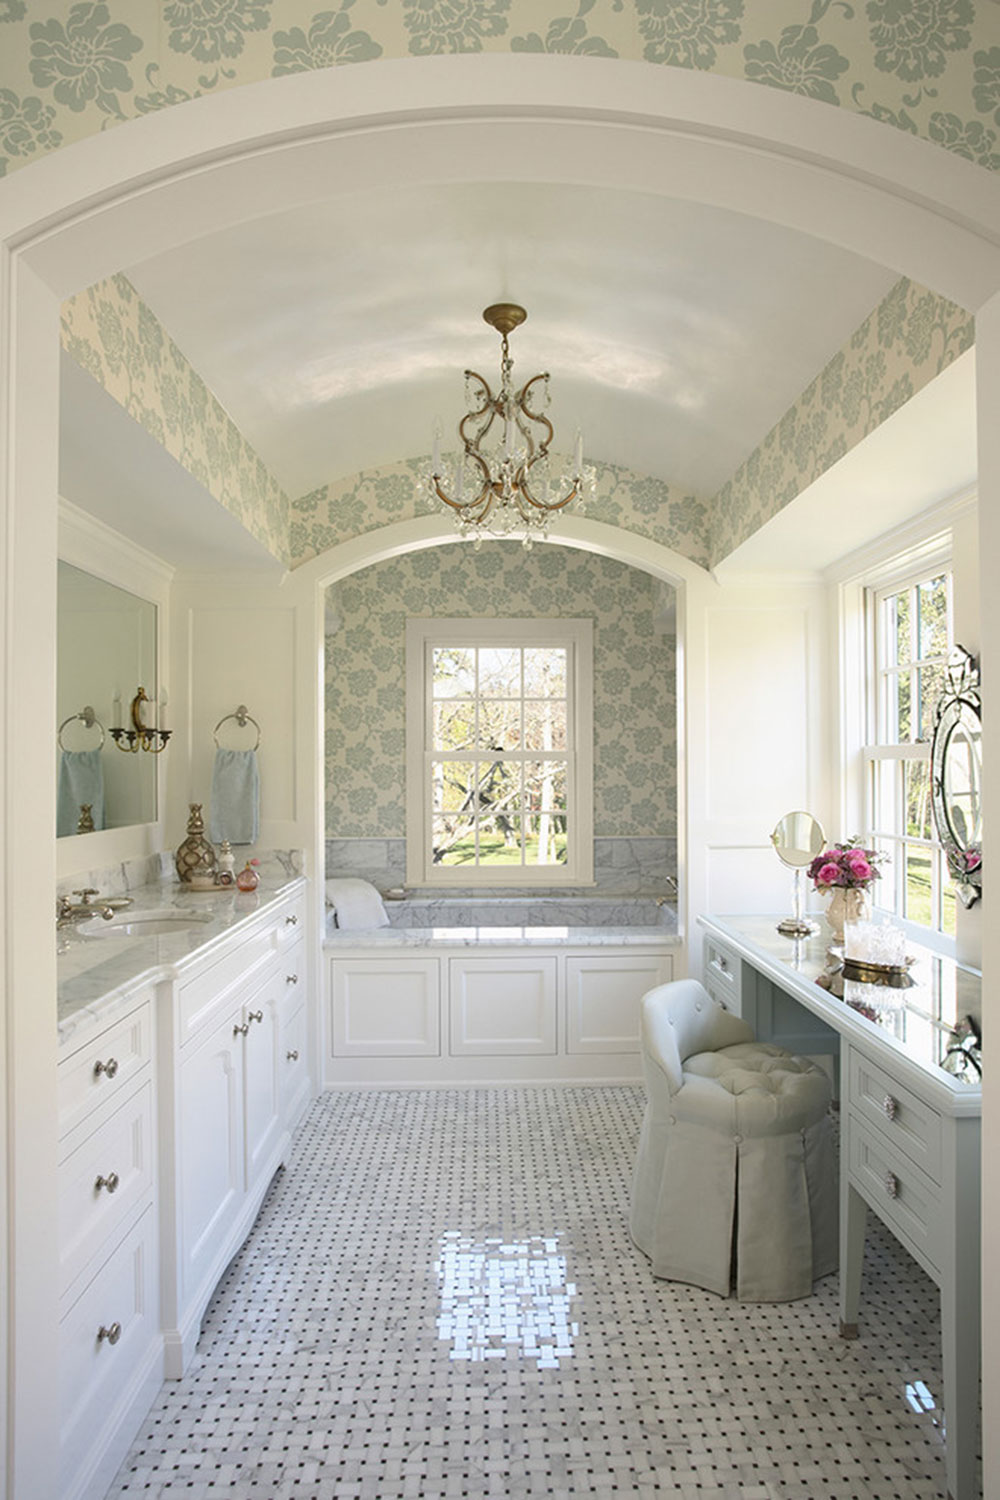 Making-Your-Bathroom-Stylish-Should-Be-A-Priority5 Bathroom interior design ideas to check out (85 pictures)